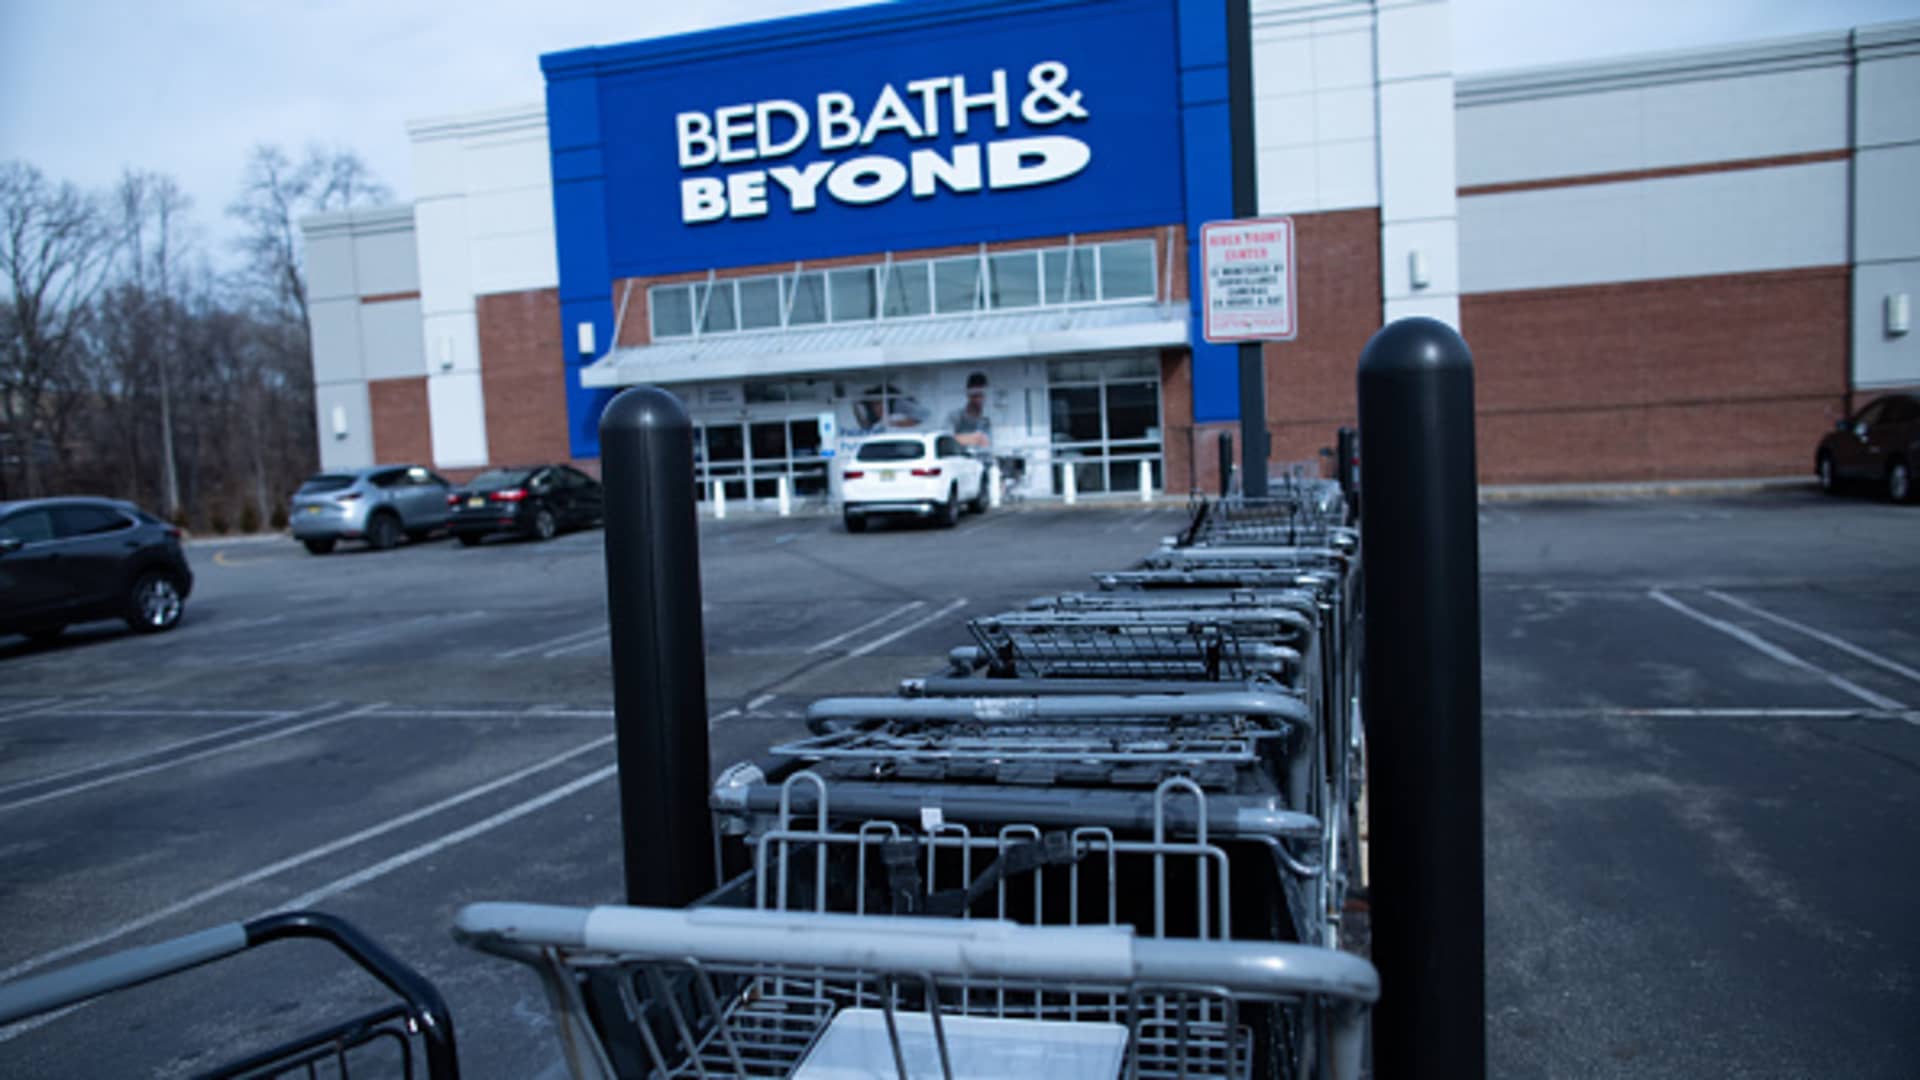 Stocks making the biggest moves midday: Bed Bath & Beyond, Digital World Acquisition, Nikola and more